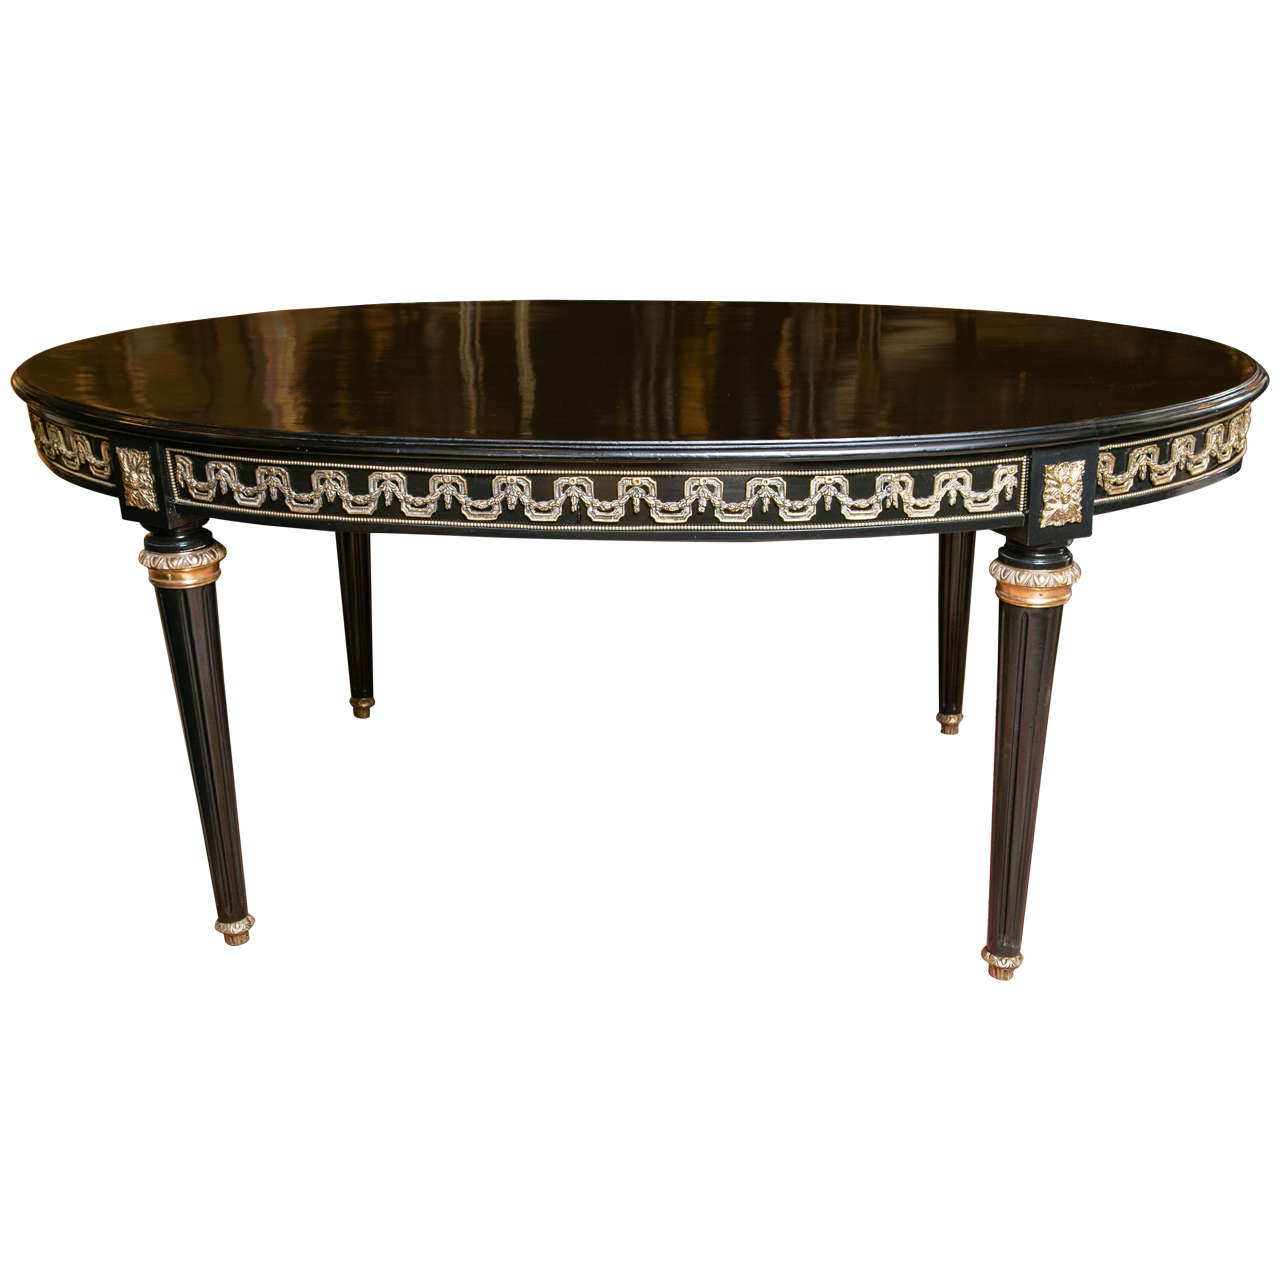 French Louis XVI Style Ebonized Oval Top Dining or Center Table by Jansen